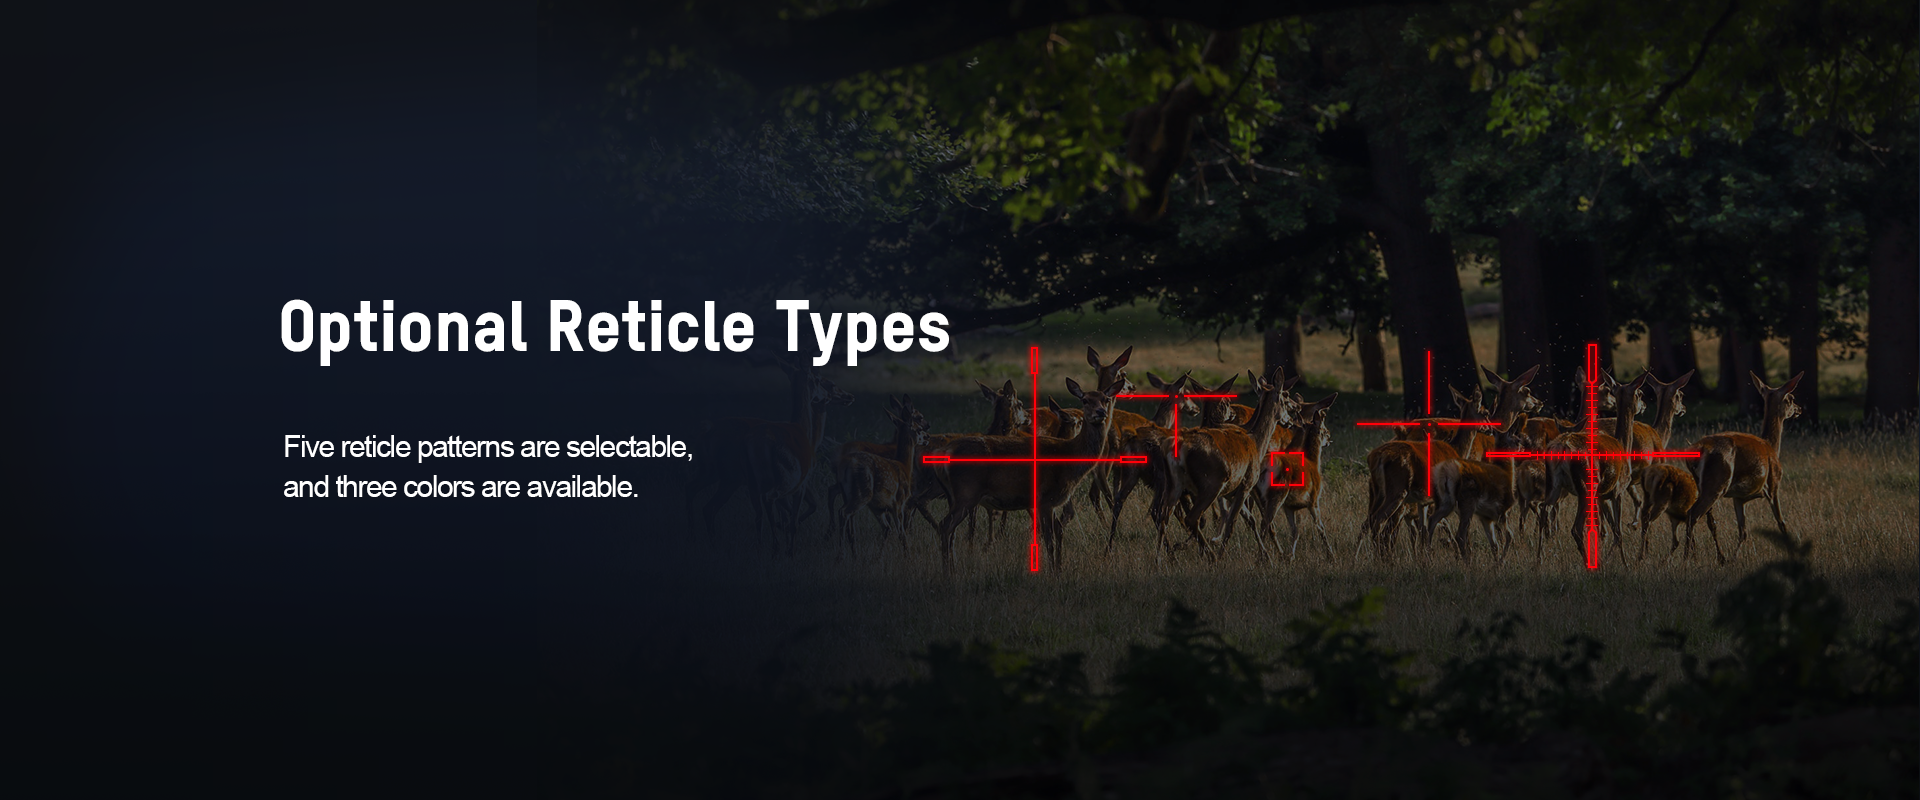 03-Optional Reticle Types-Scope-thunder  .png